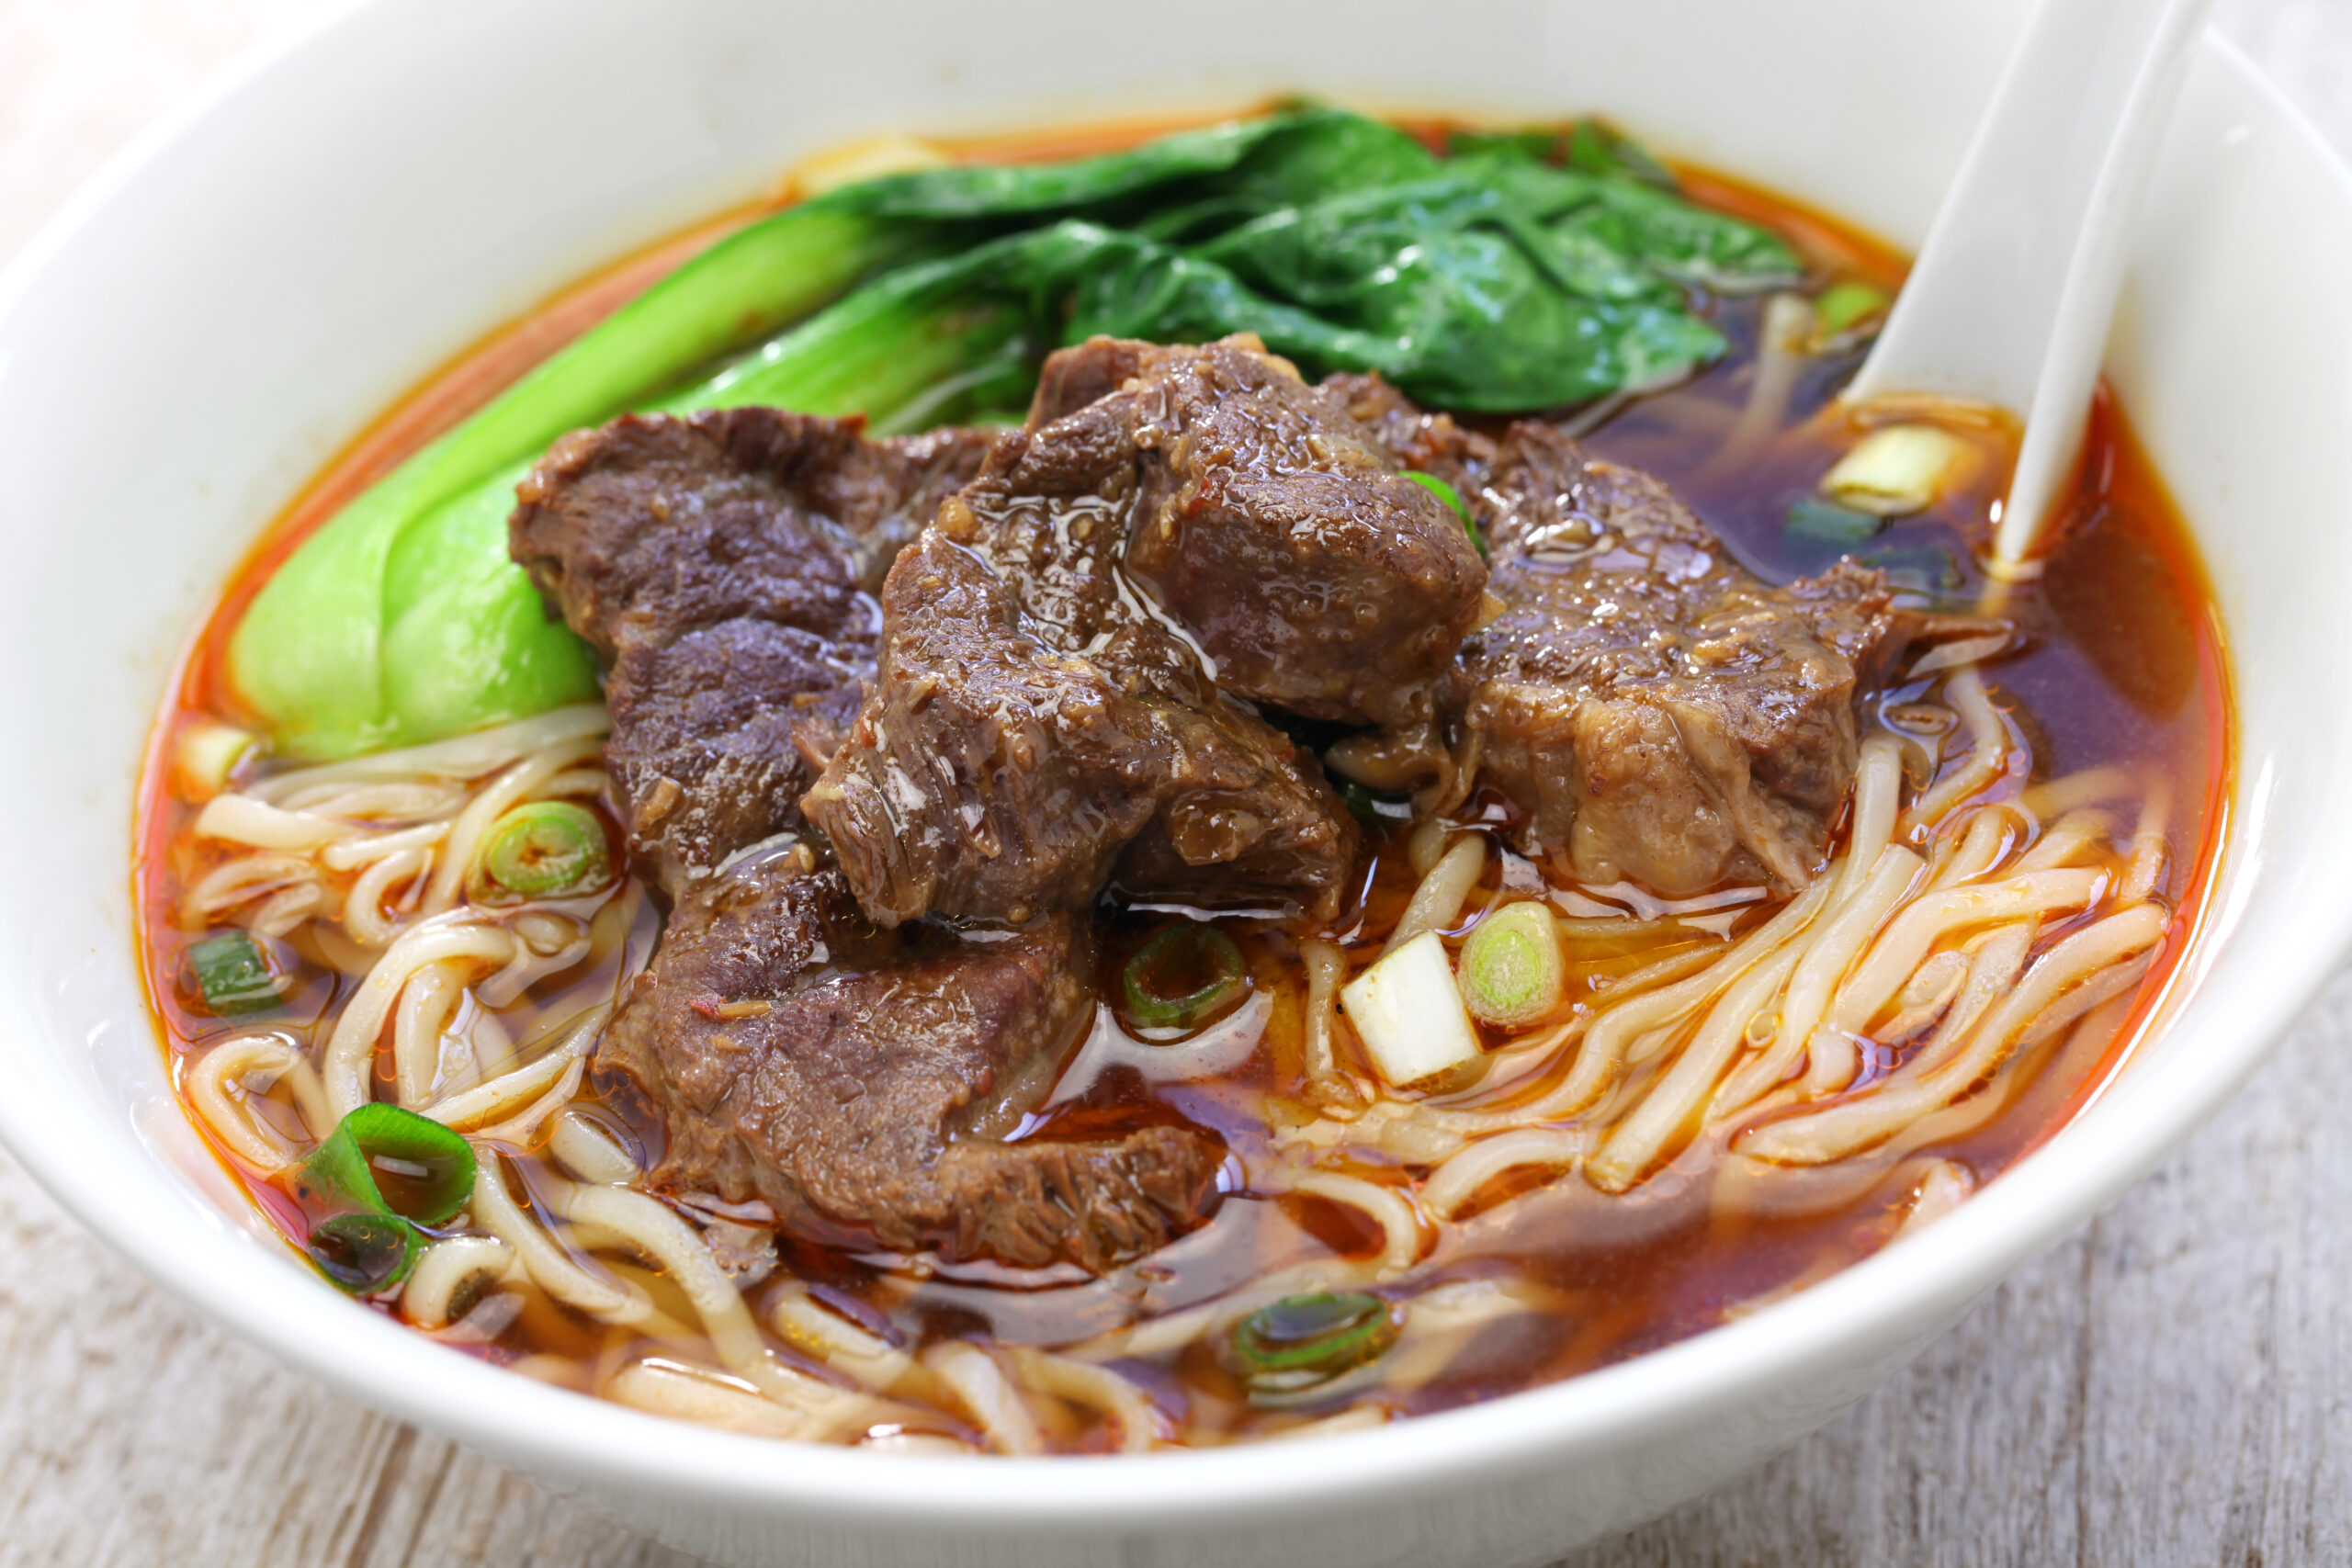 One of Taiwan's most iconic dishes, Beef noodle soup.